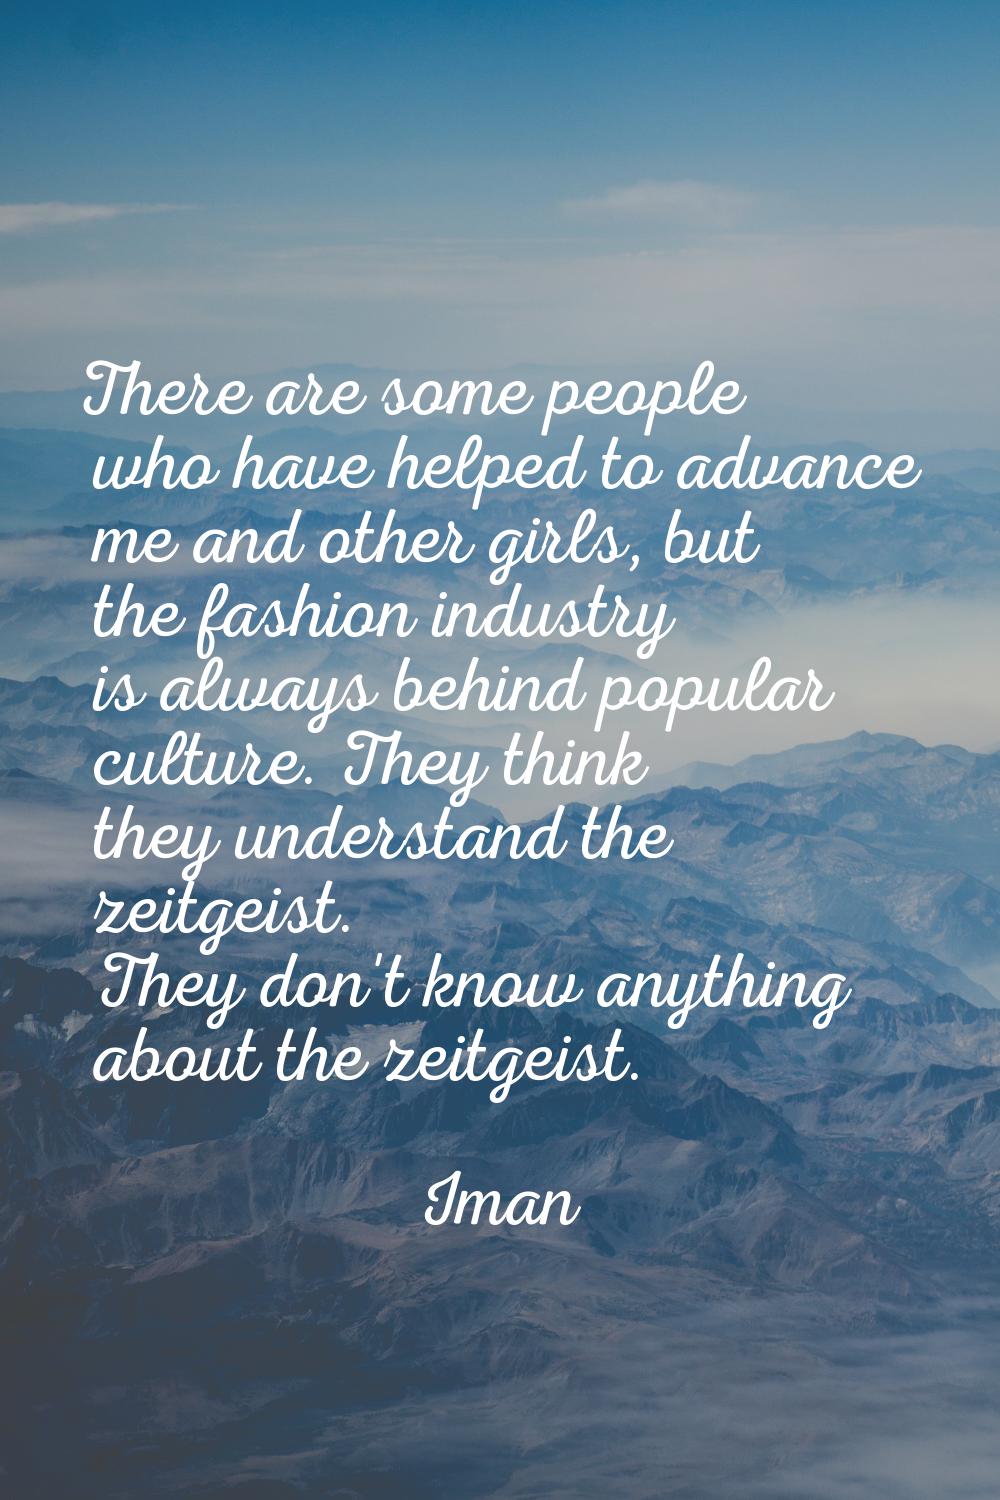 There are some people who have helped to advance me and other girls, but the fashion industry is al